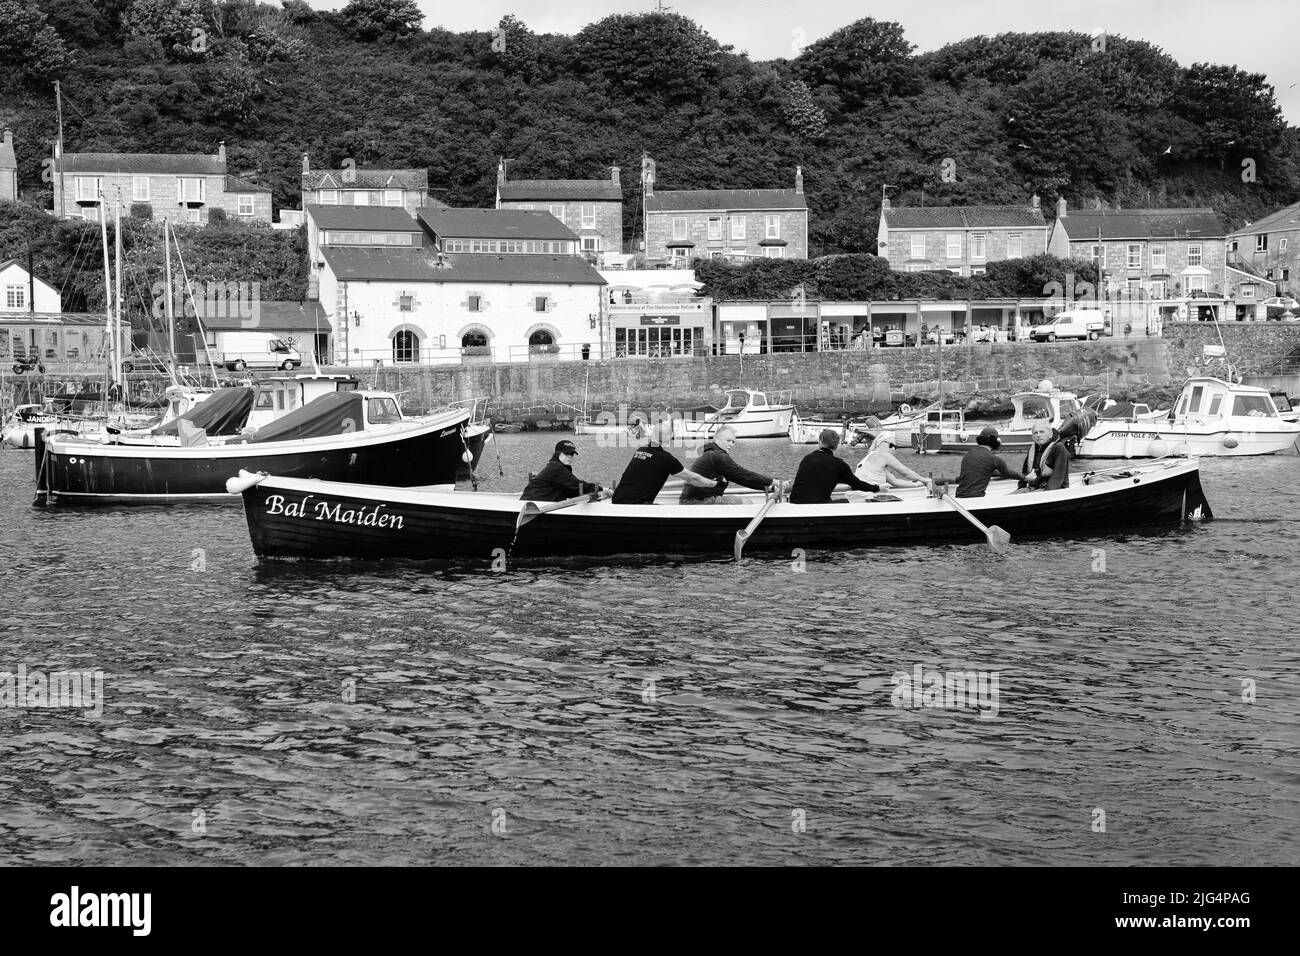 Bal Maiden Pilot Gig leaves Porthleven, Cornwall on a training run Stock Photo